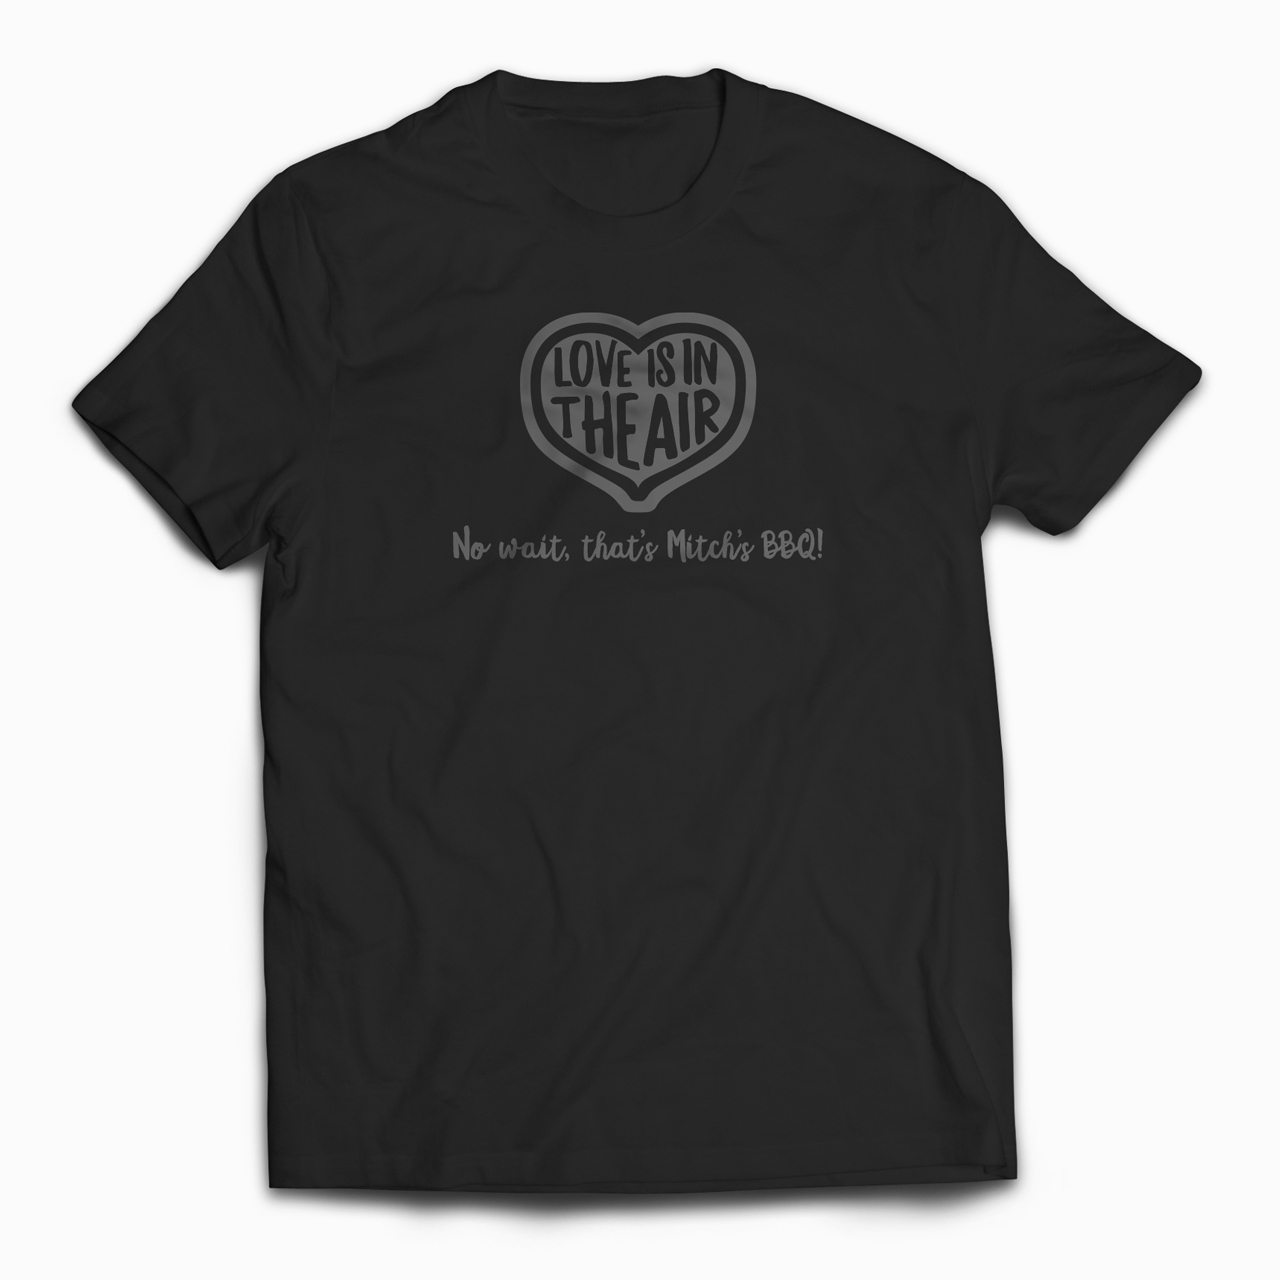 An image of a T-shirt design that says "Love is in the Air. No Wait, That's Mitch's BBQ"